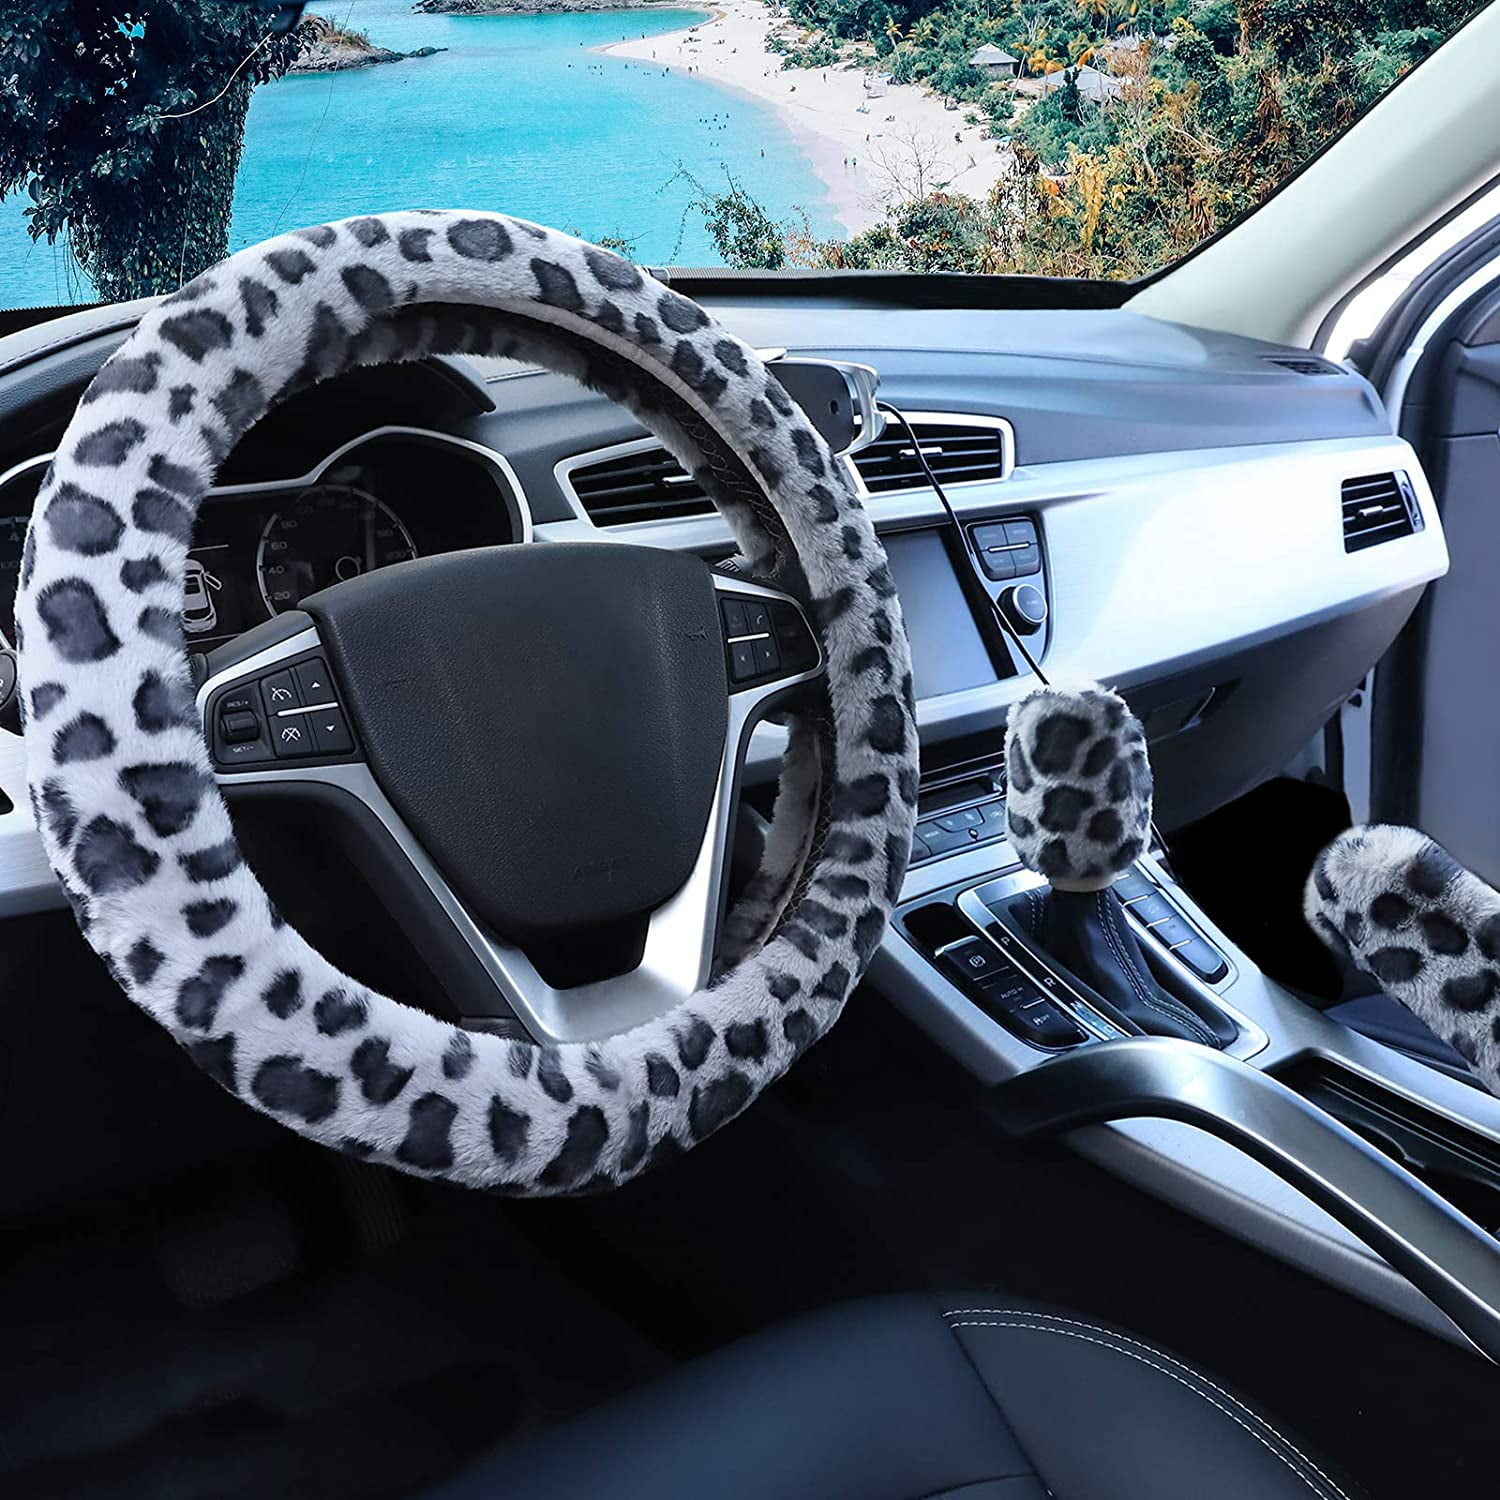 Cleana Arts Universal 3 in 1 Steering Wheel Cover 15 Handbrake Cover Gear Shift Cover Winter Warm Faux Wool 